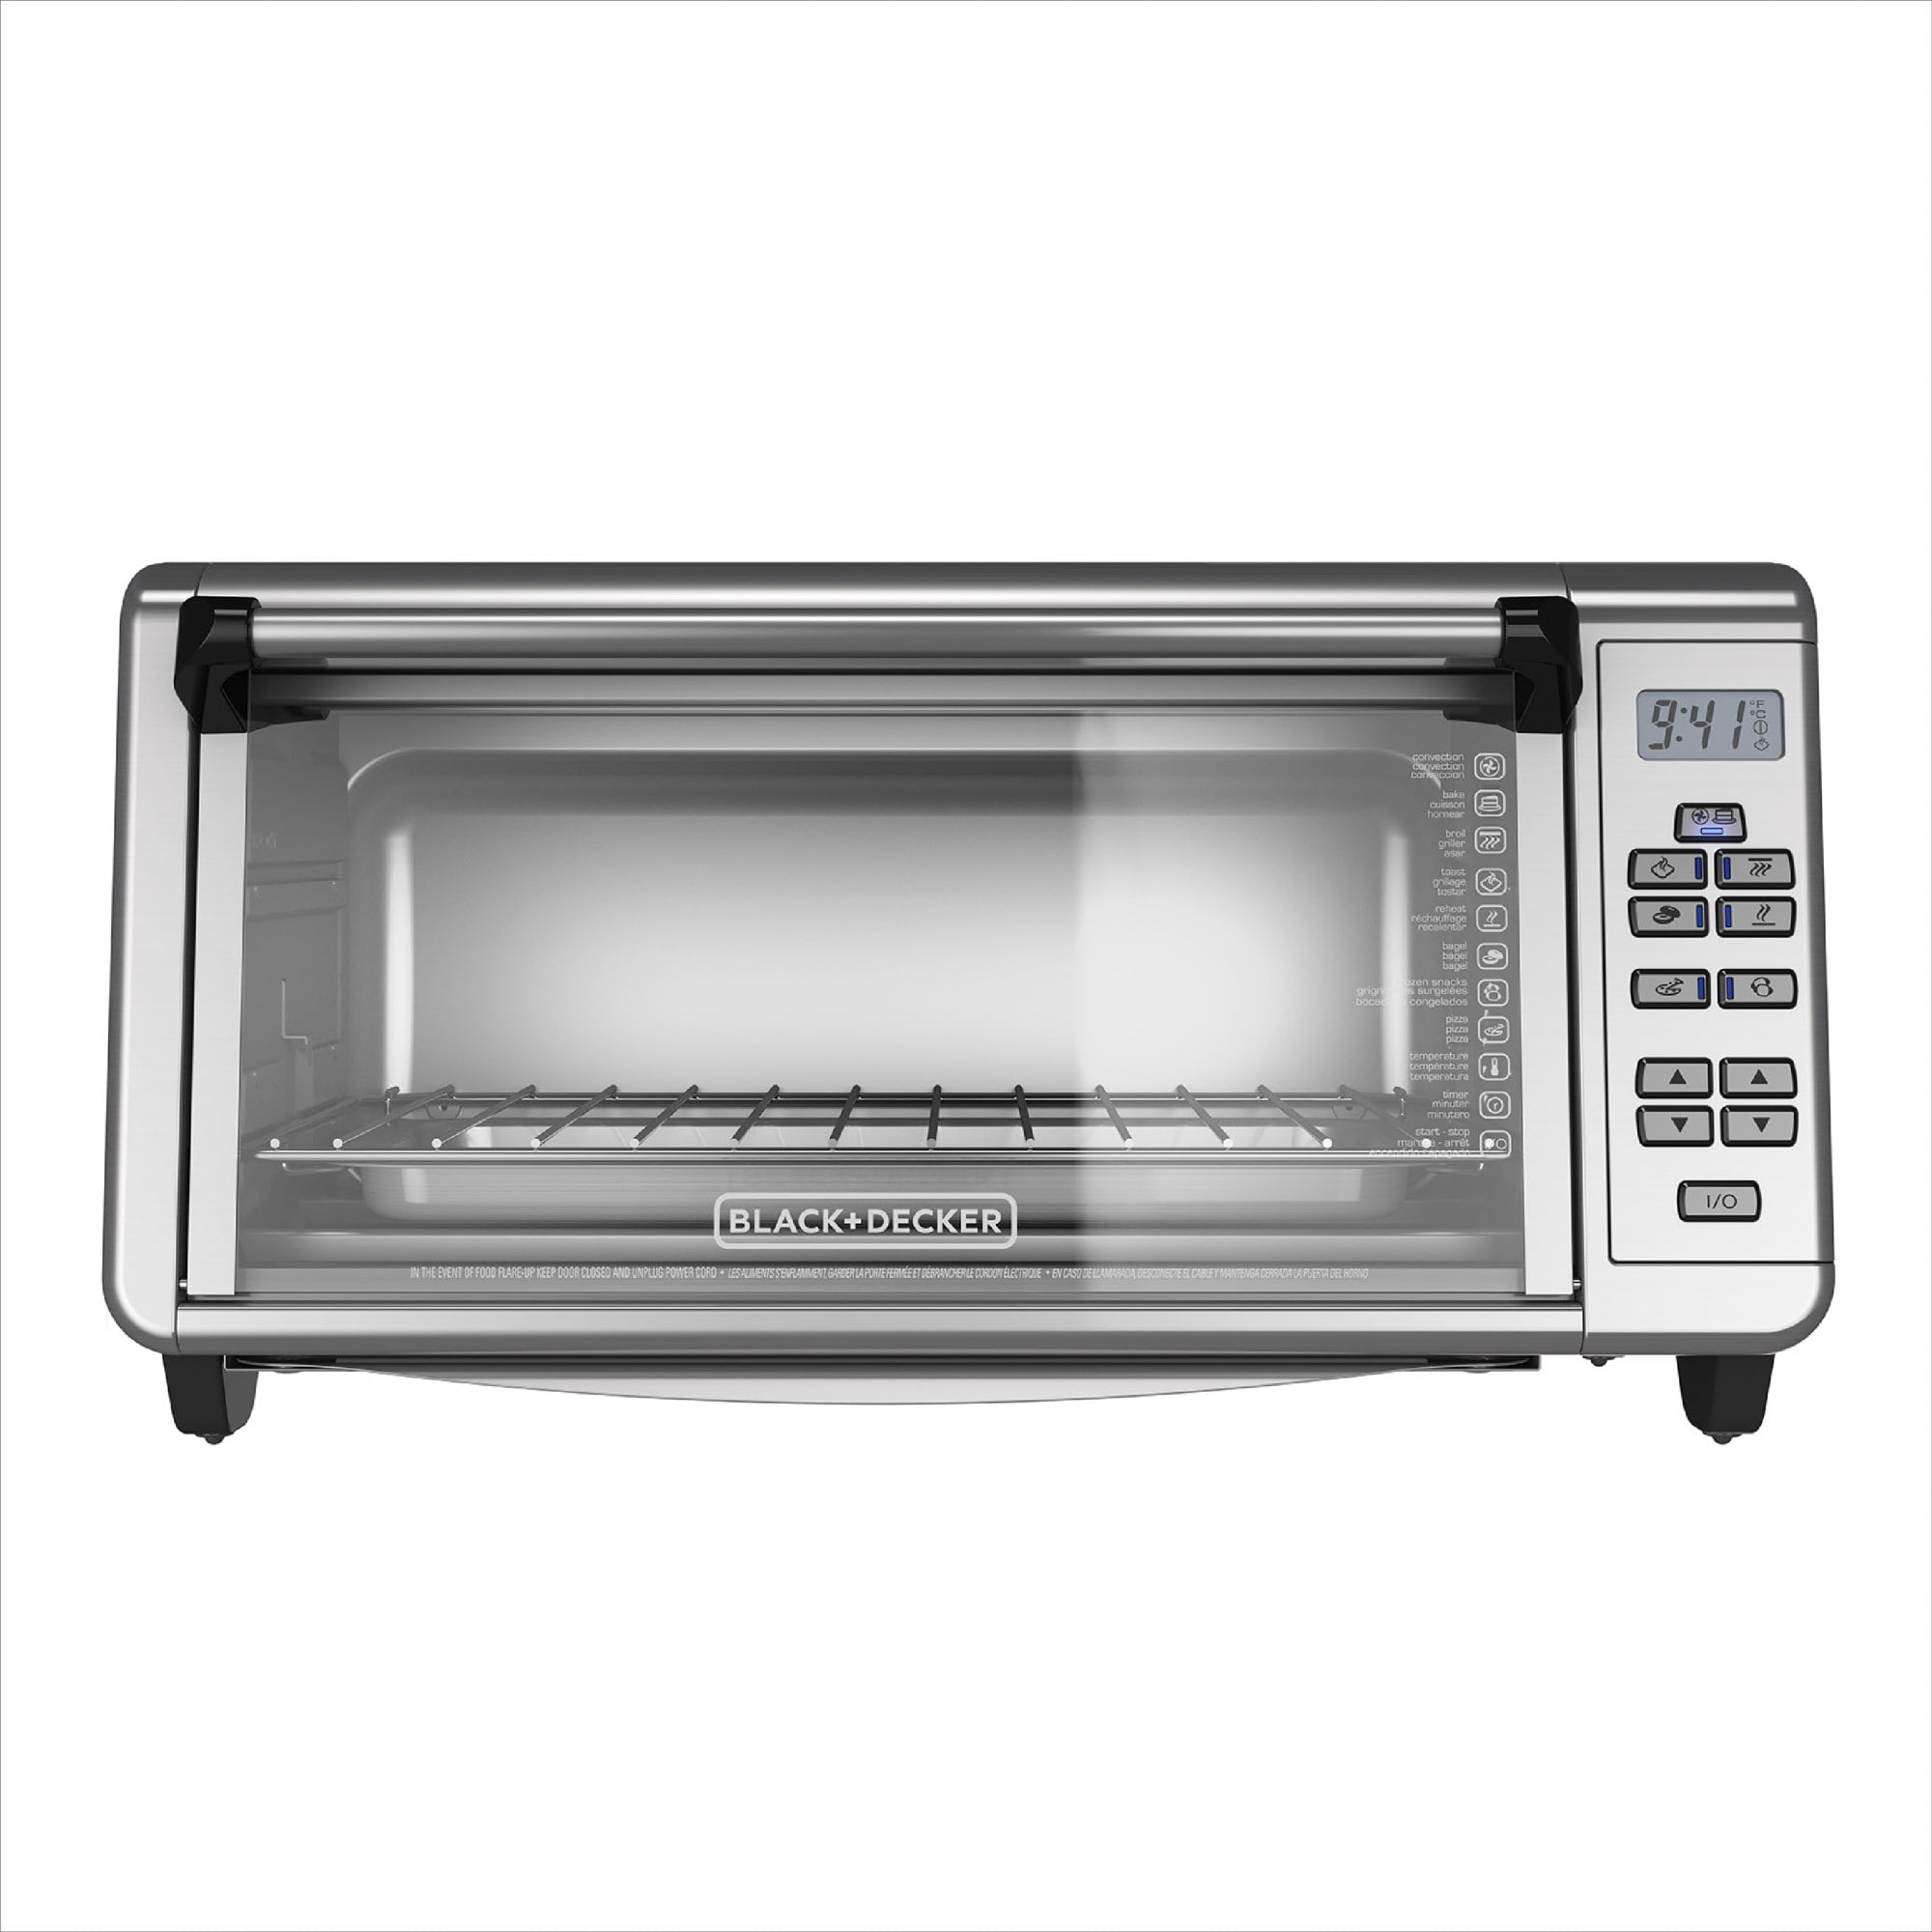 BLACK+DECKER 8-Slice Stainless Steel Convection Toaster Oven (1500